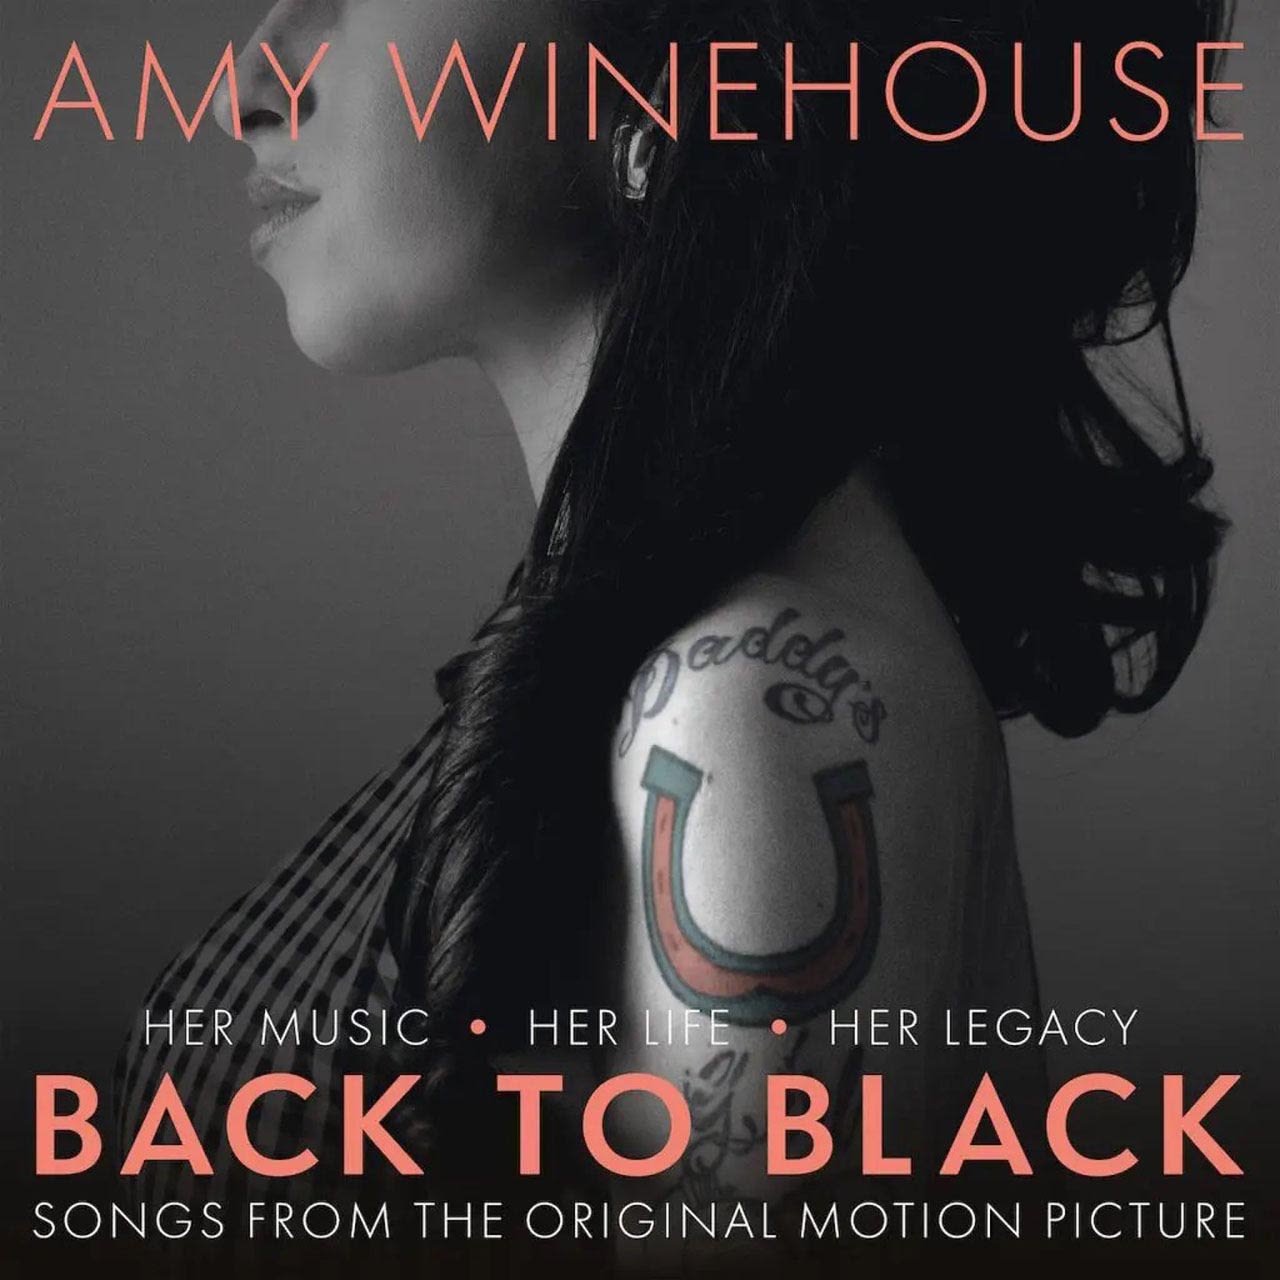 Amy Winehouse ‘Back To Black’ Biopic Soundtrack Out Now